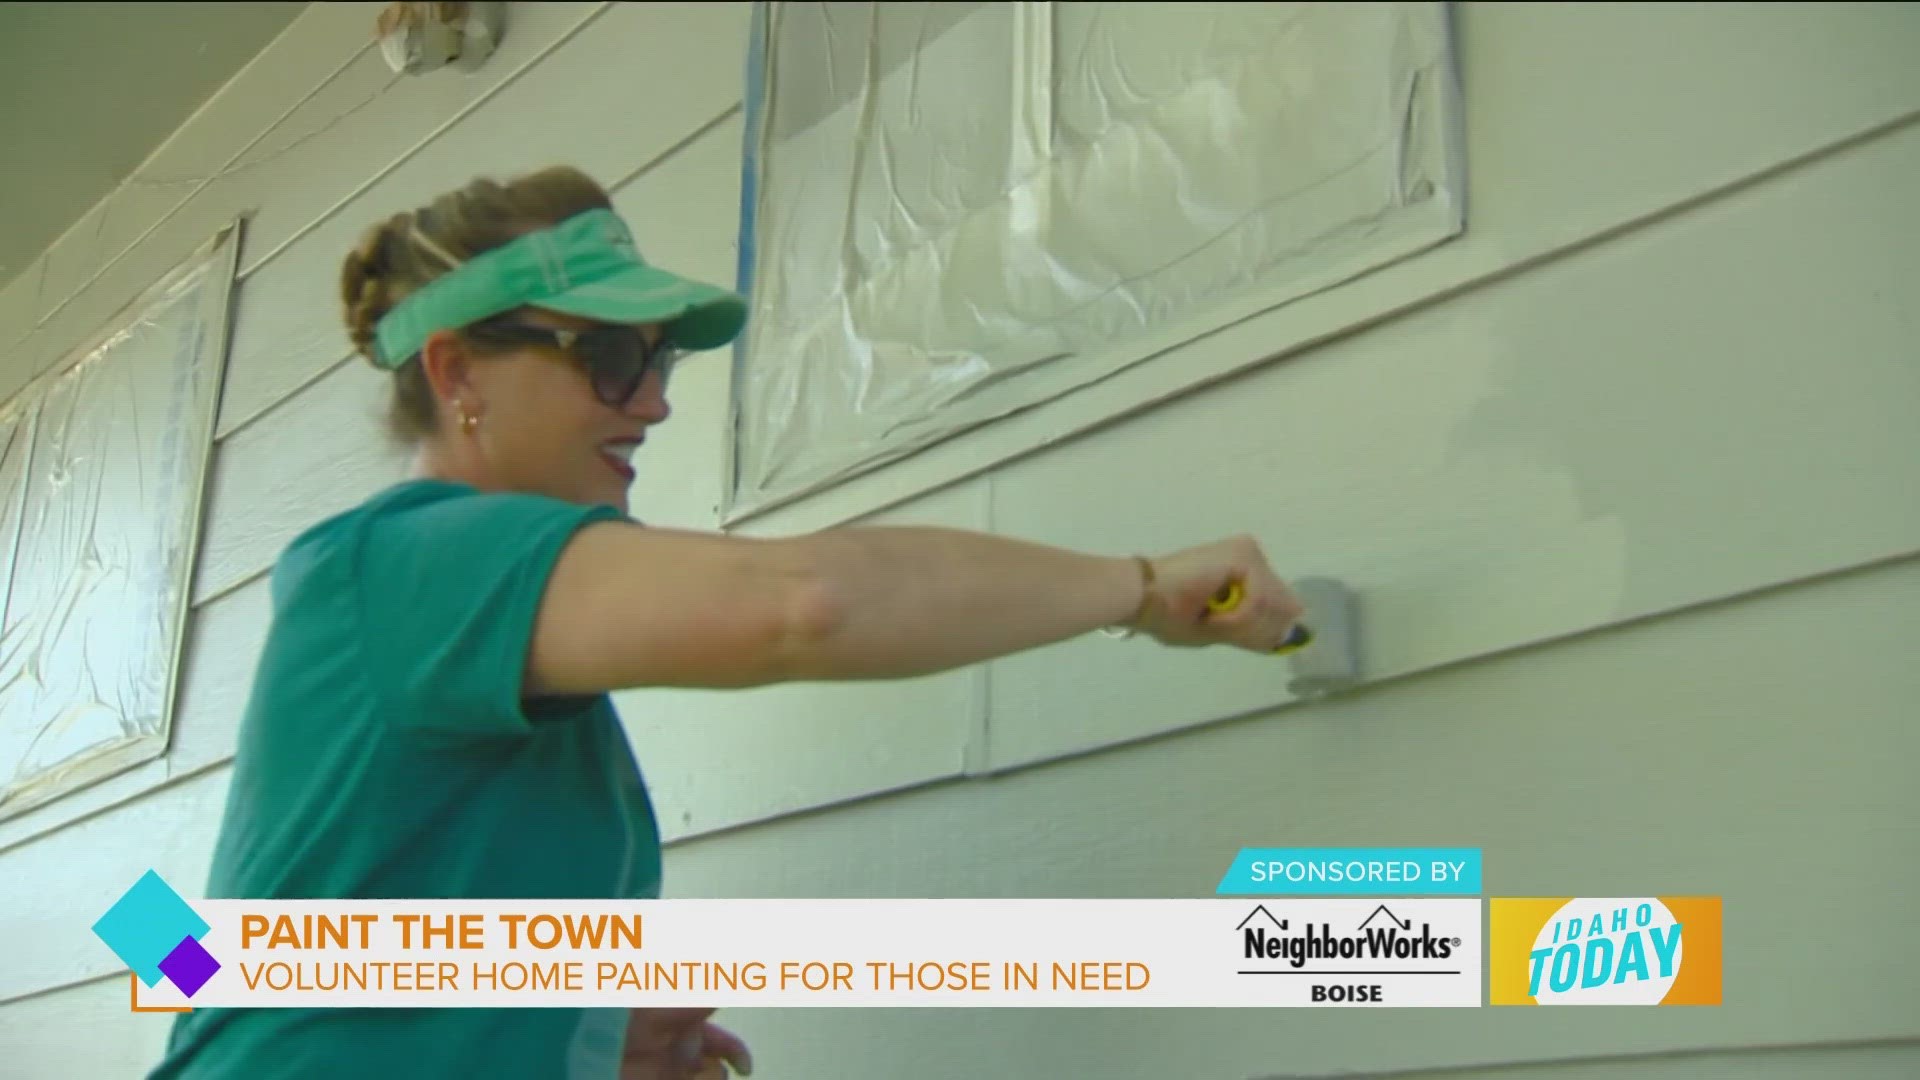 Sponsored by NeighborWorks Boise. Volunteer for this year's Paint The Town!